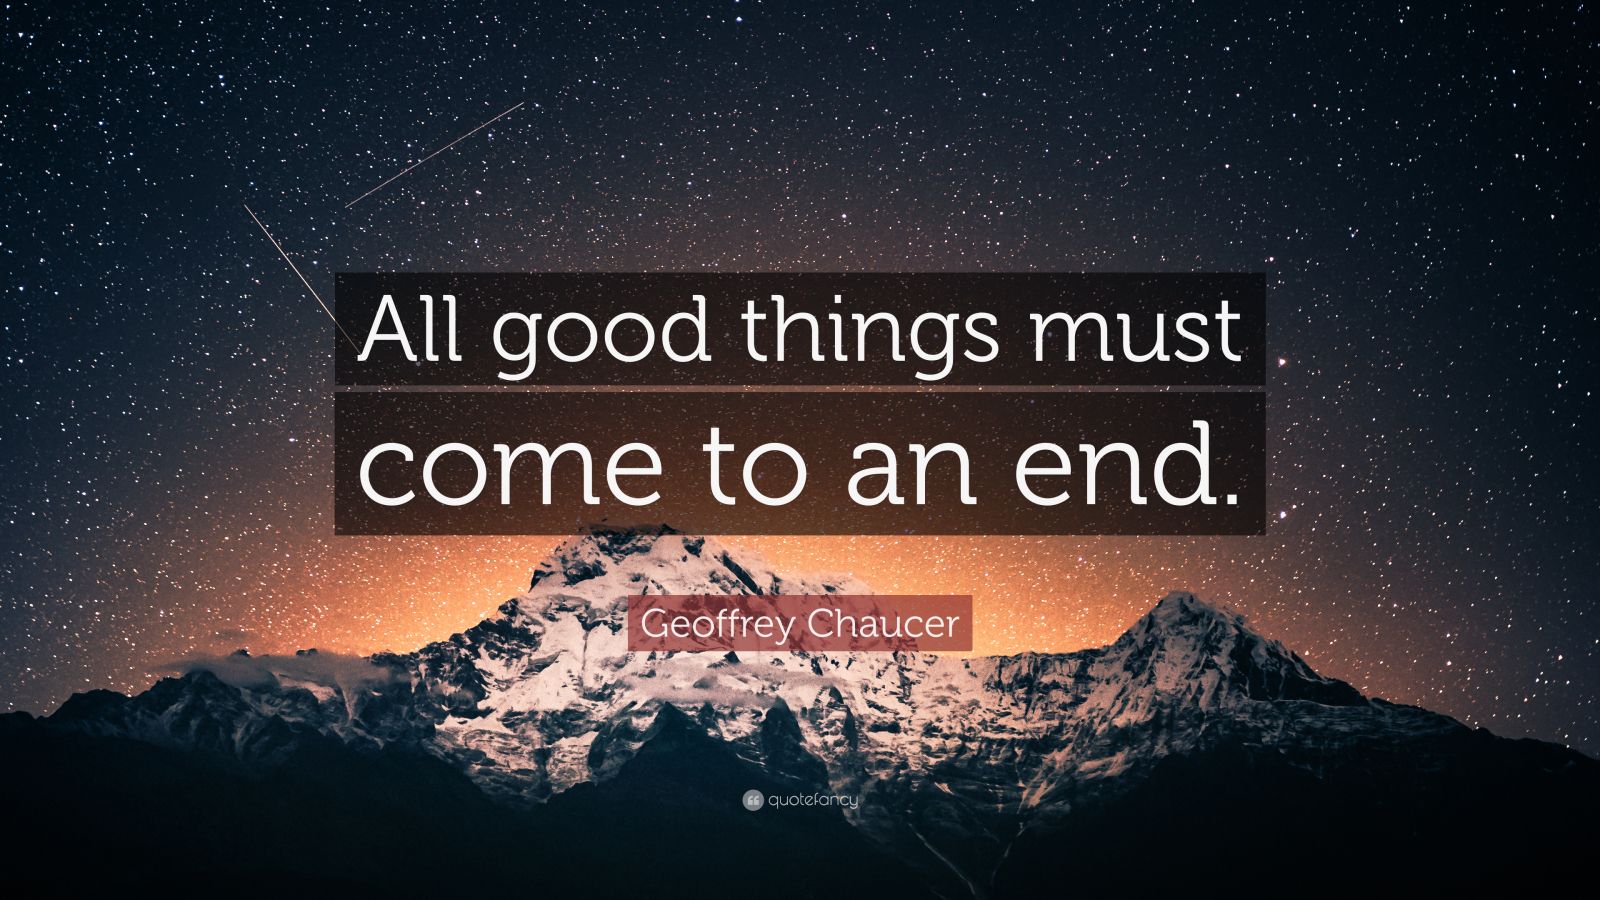 Geoffrey Chaucer Quote: “All good things must come to an end.” (12 wallpapers ...1600 x 900